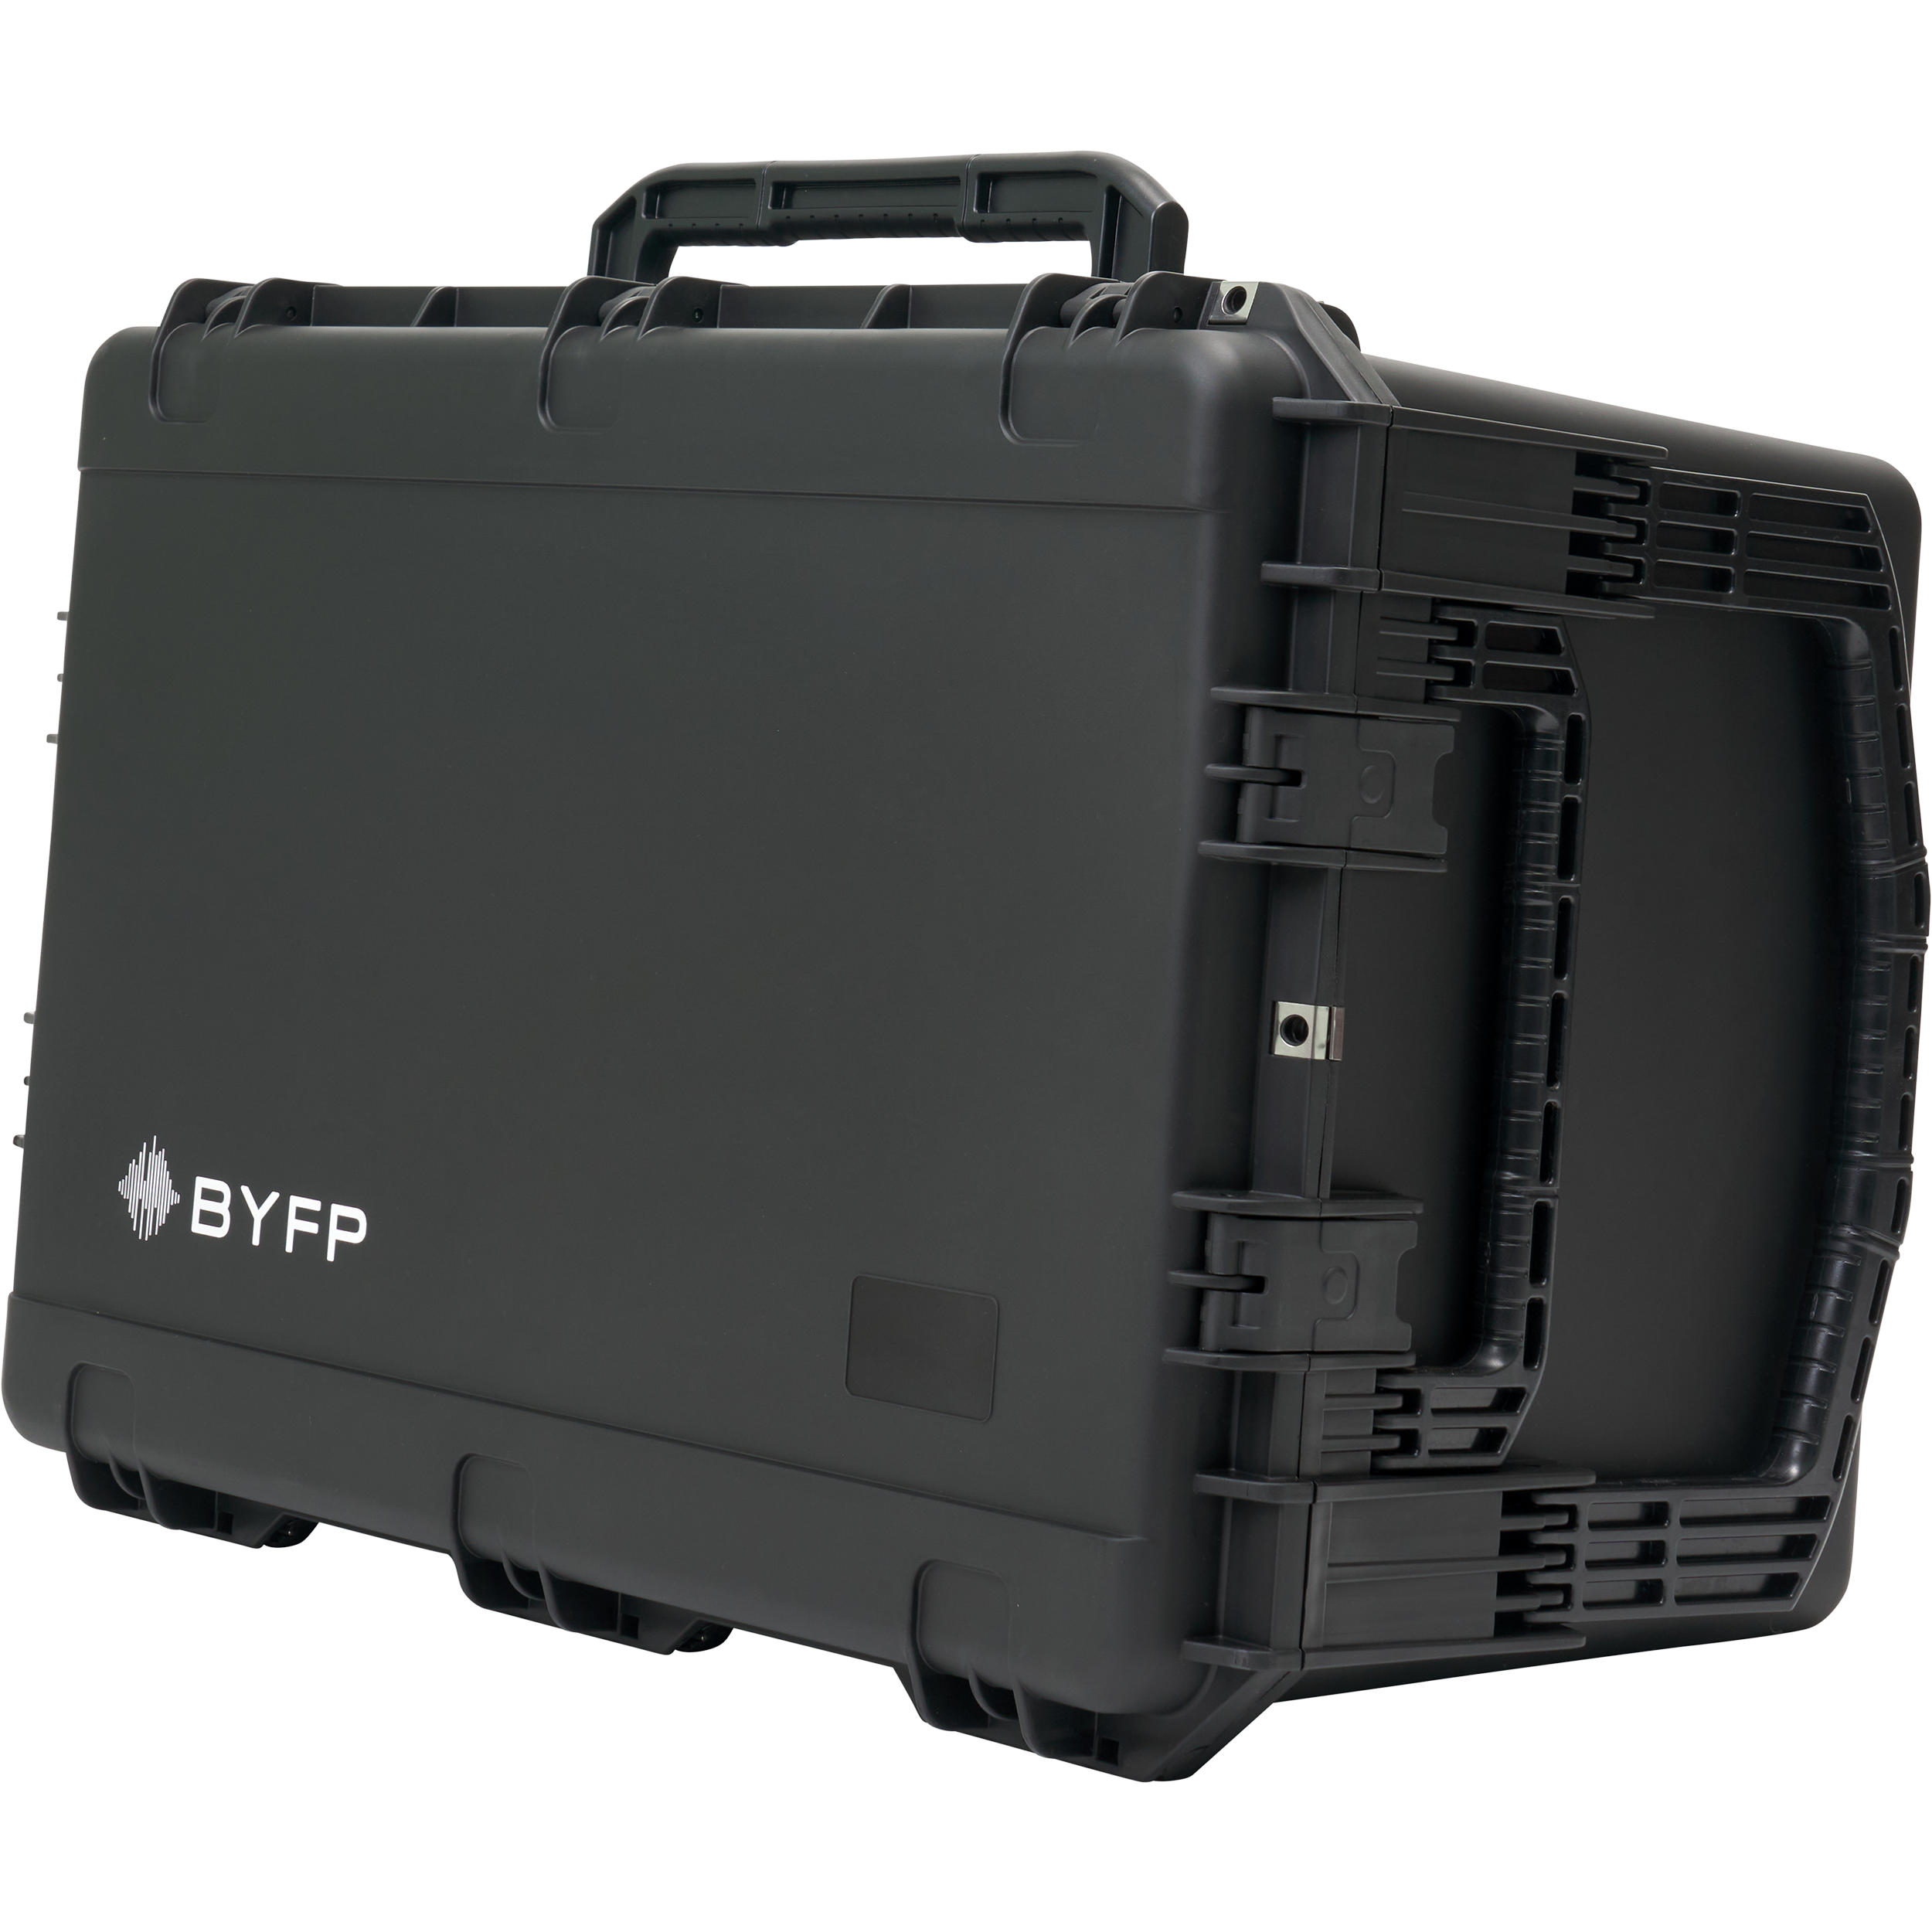 BYFP ipCase for RCF TT22